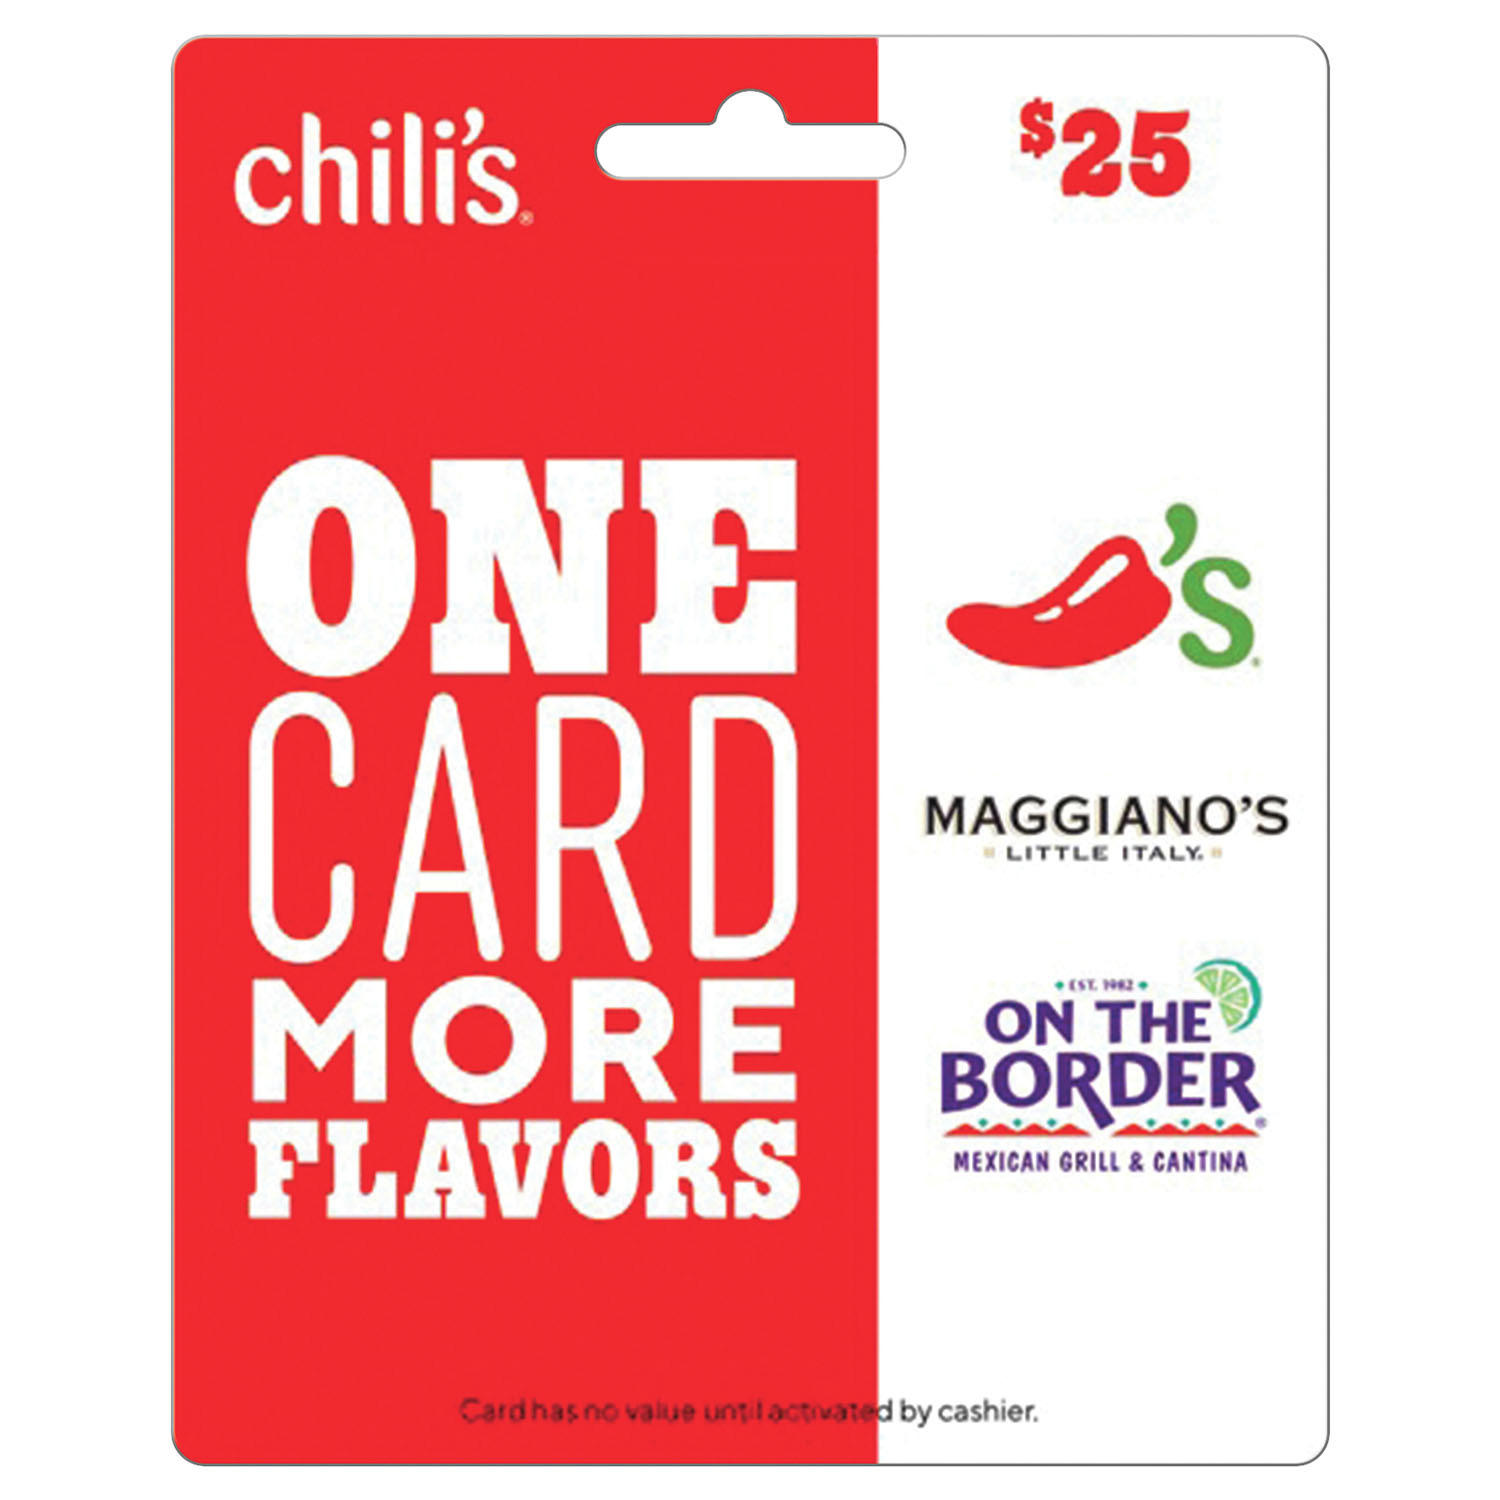 Chili's, Maggiano's, and On The Border $25 Gift Card